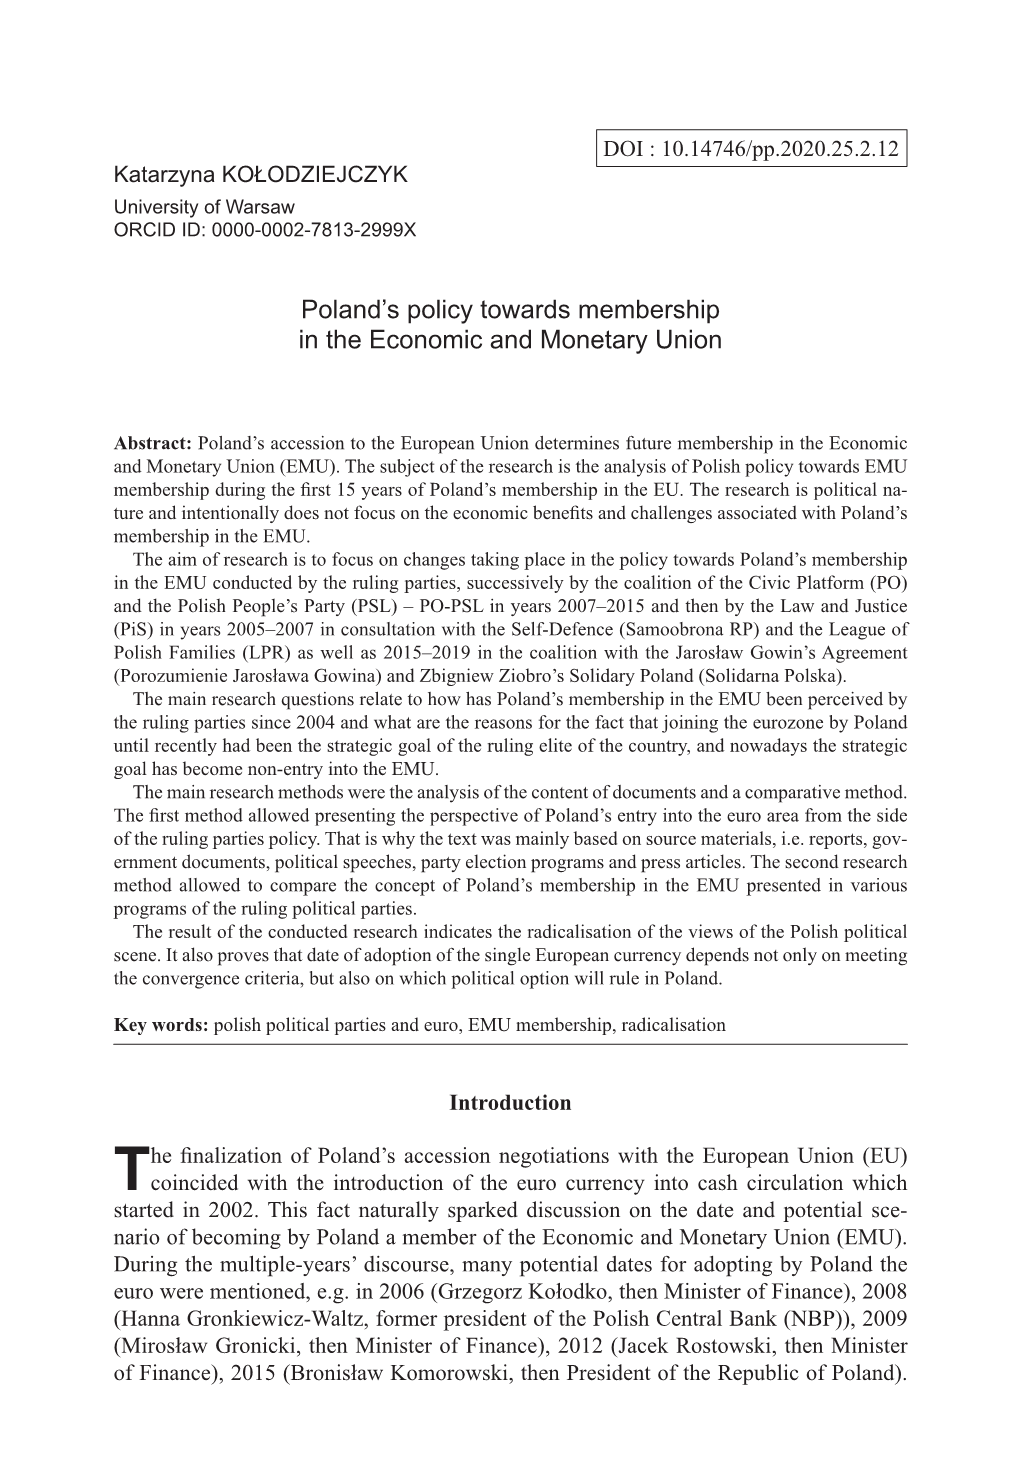 Poland's Policy Towards Membership in the Economic and Monetary Union